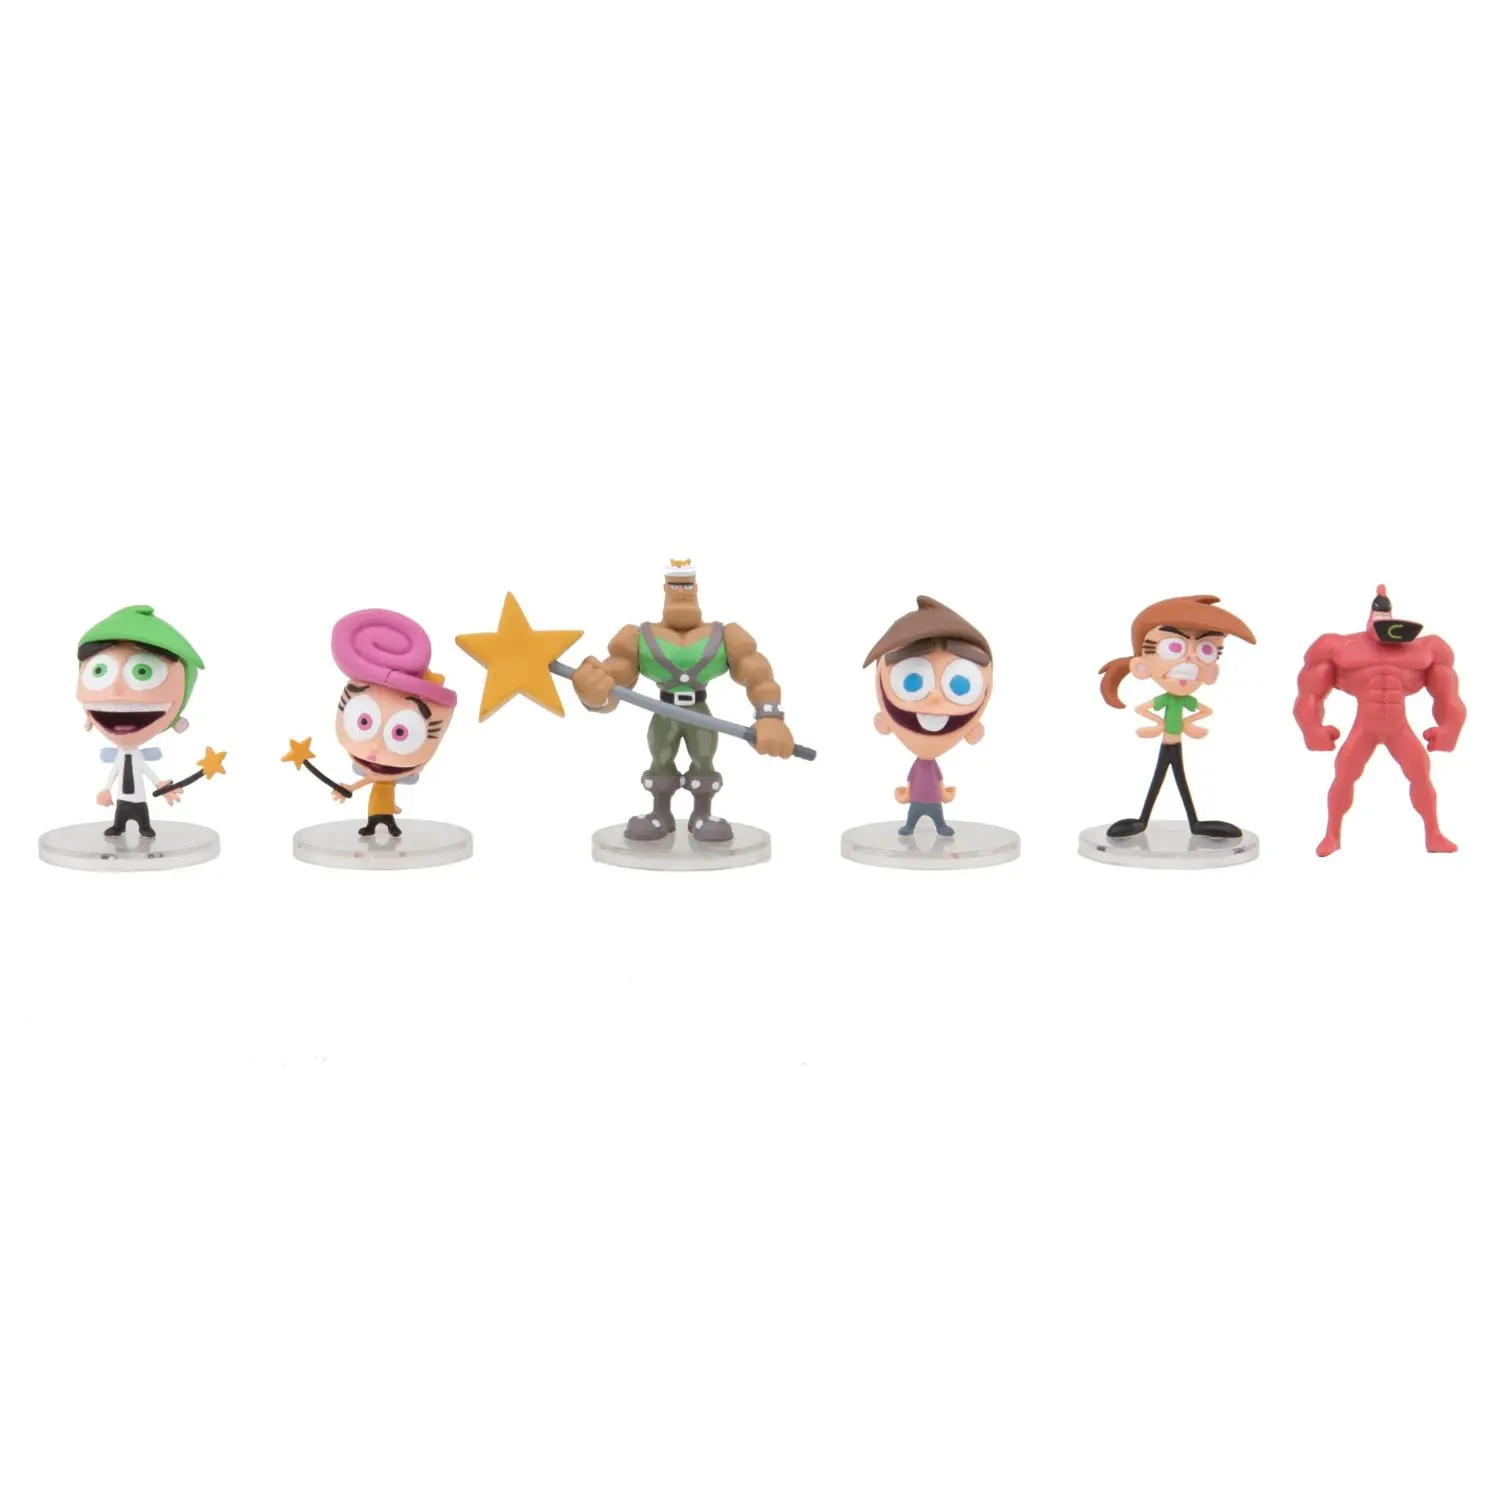 Nicktoons Fairly Odd Parents Deluxe Collector Toys (6-Pack), 2. Manufacture...